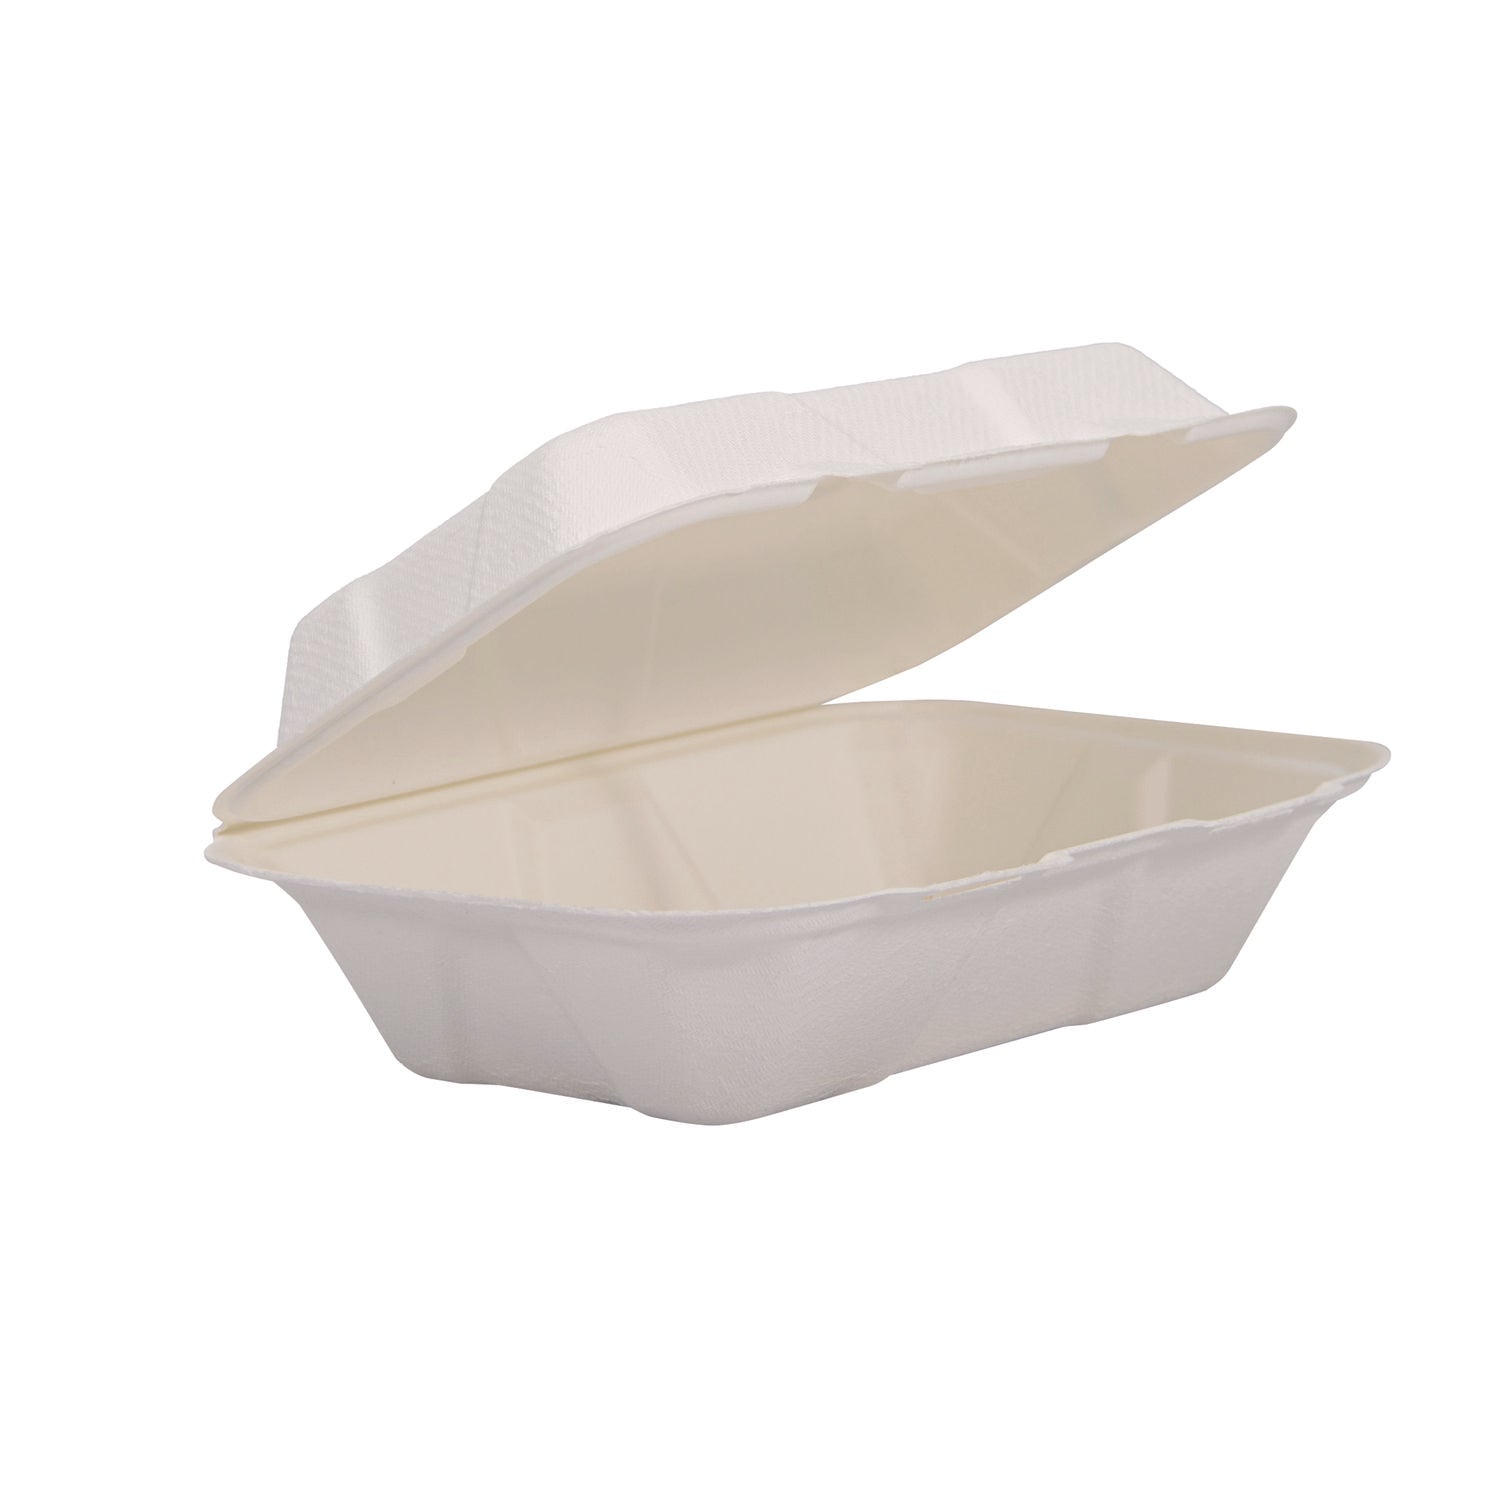 compostable-fiber-hinged-containers-proplanet-seal-634-x-906-x-197-ivory-molded-fiber-200-carton_dcchc206fbr1 - 1